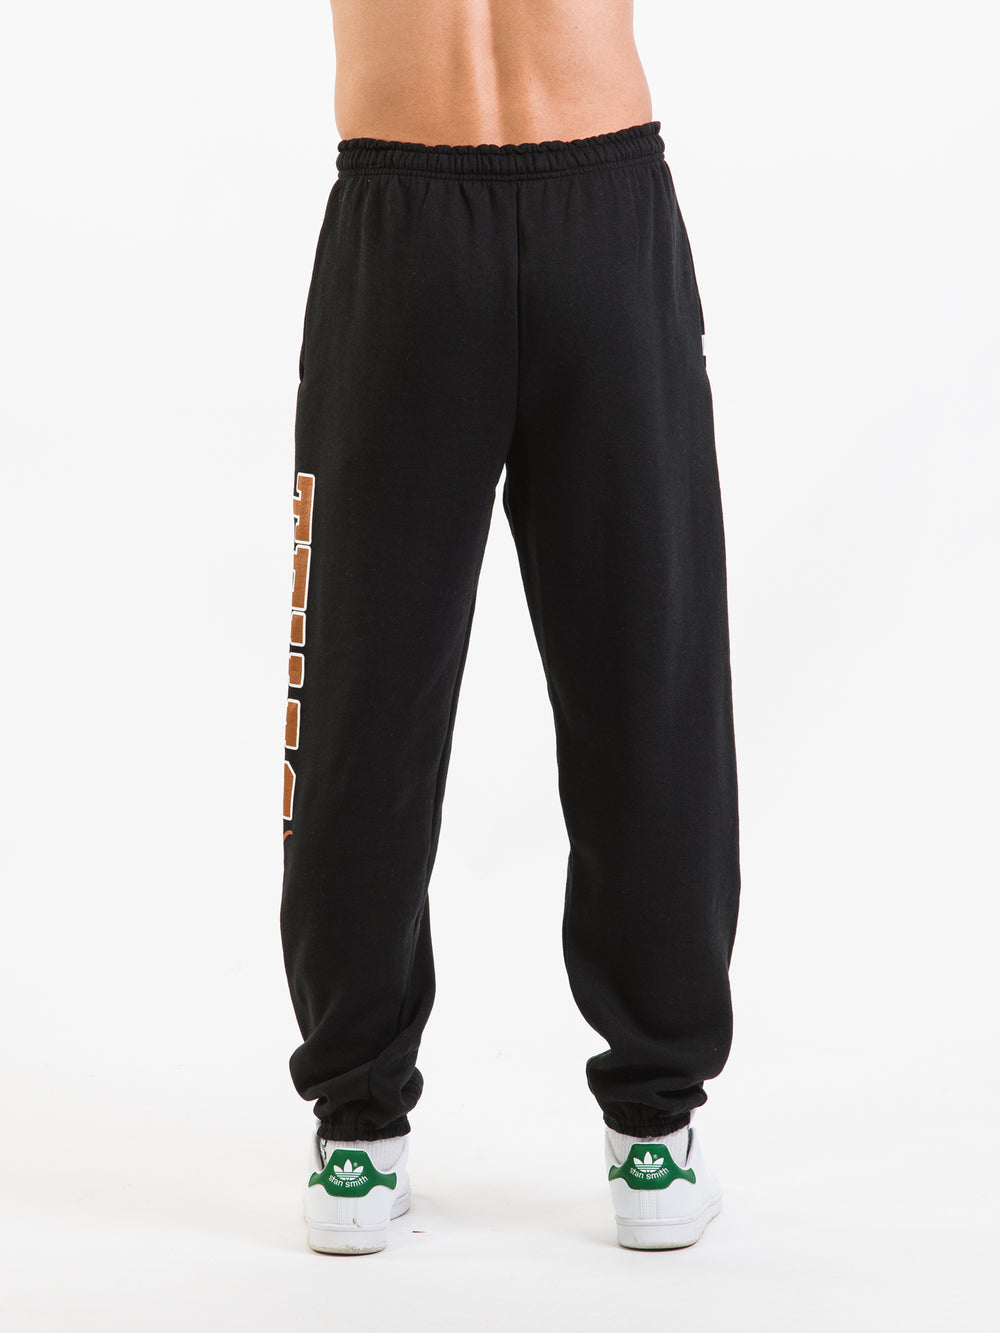 RUSSELL TEXAS STATE SWEATPANTS - CLEARANCE